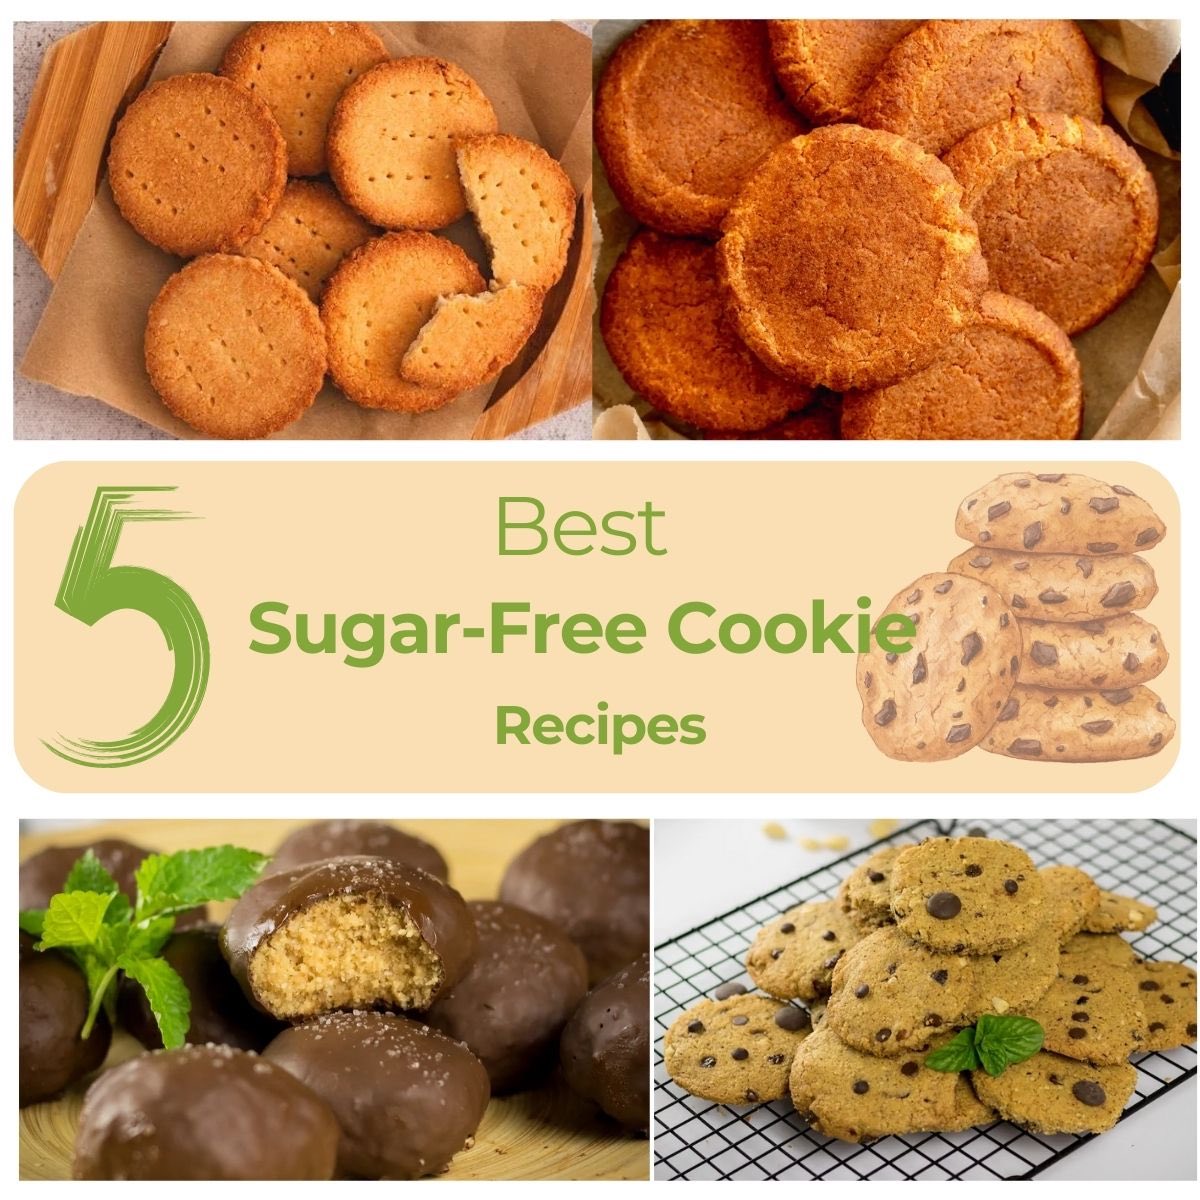 A photo collection of the best sugar-free cookie recipes.